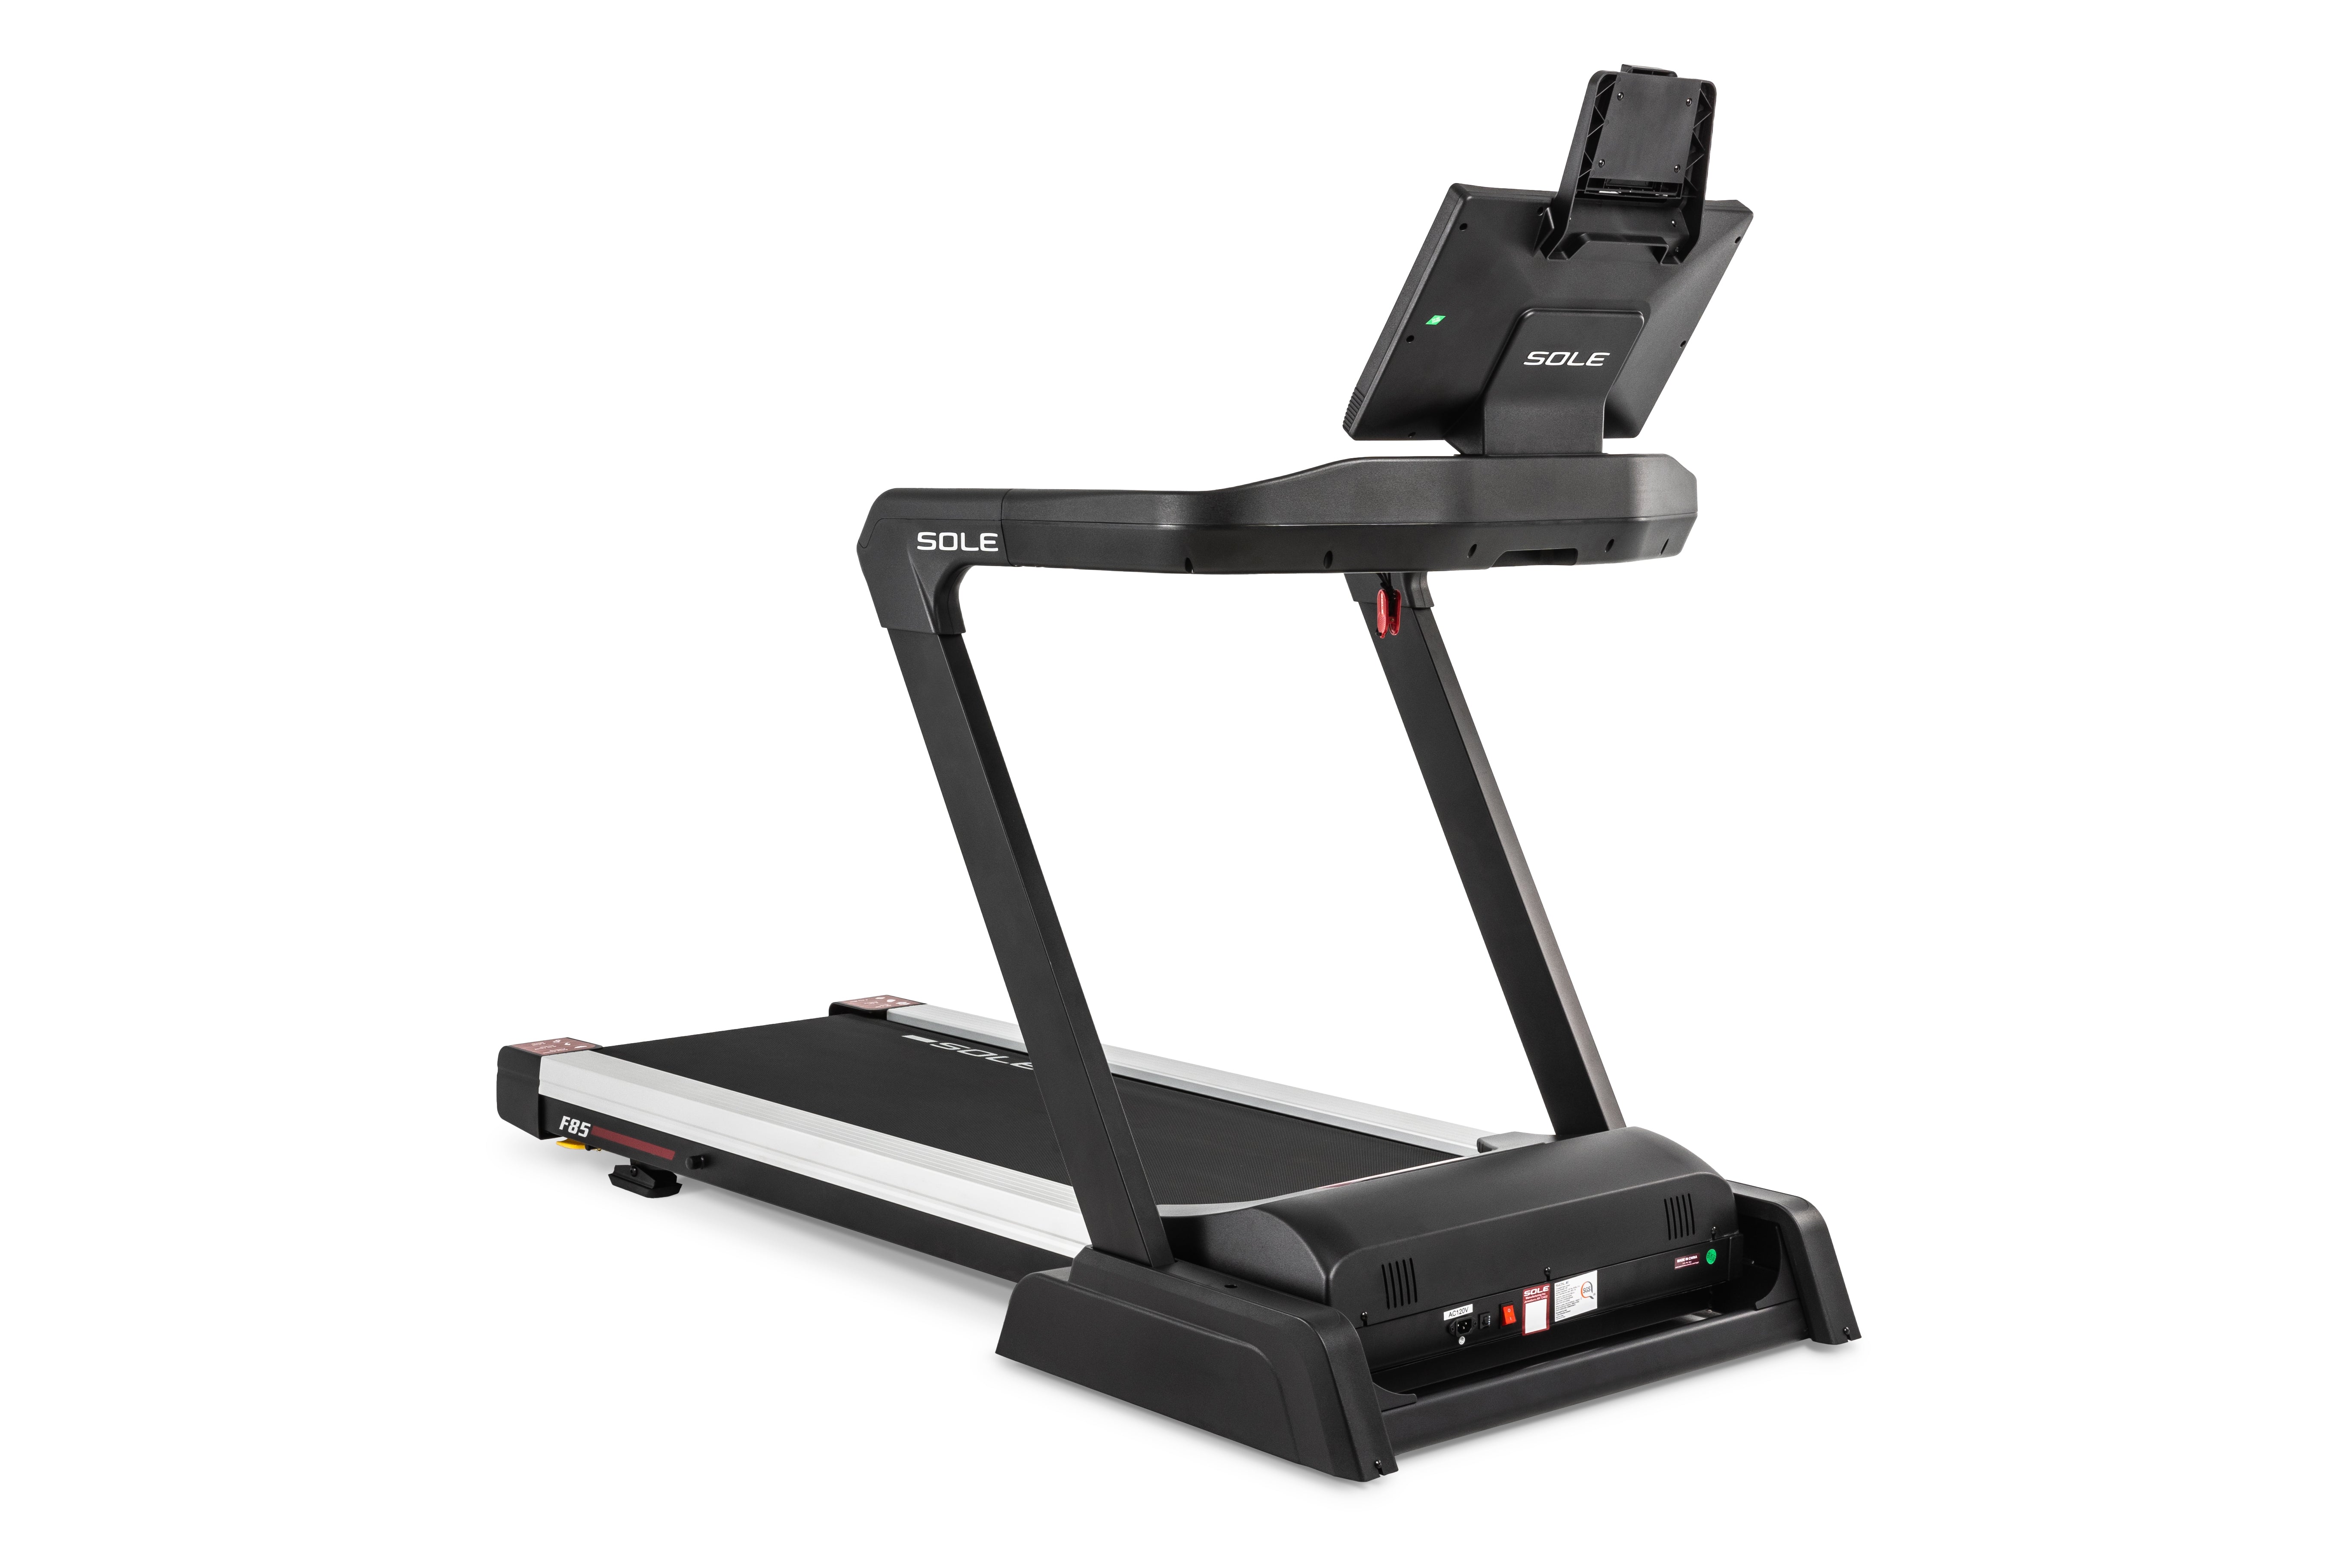 Angled view of the Sole F85 treadmill featuring a black frame with "SOLE" branding, a digital display with an attached tablet holder, and a spacious running belt. The deck showcases the "F85" logo and red accents, and the base has built-in controls and safety features.